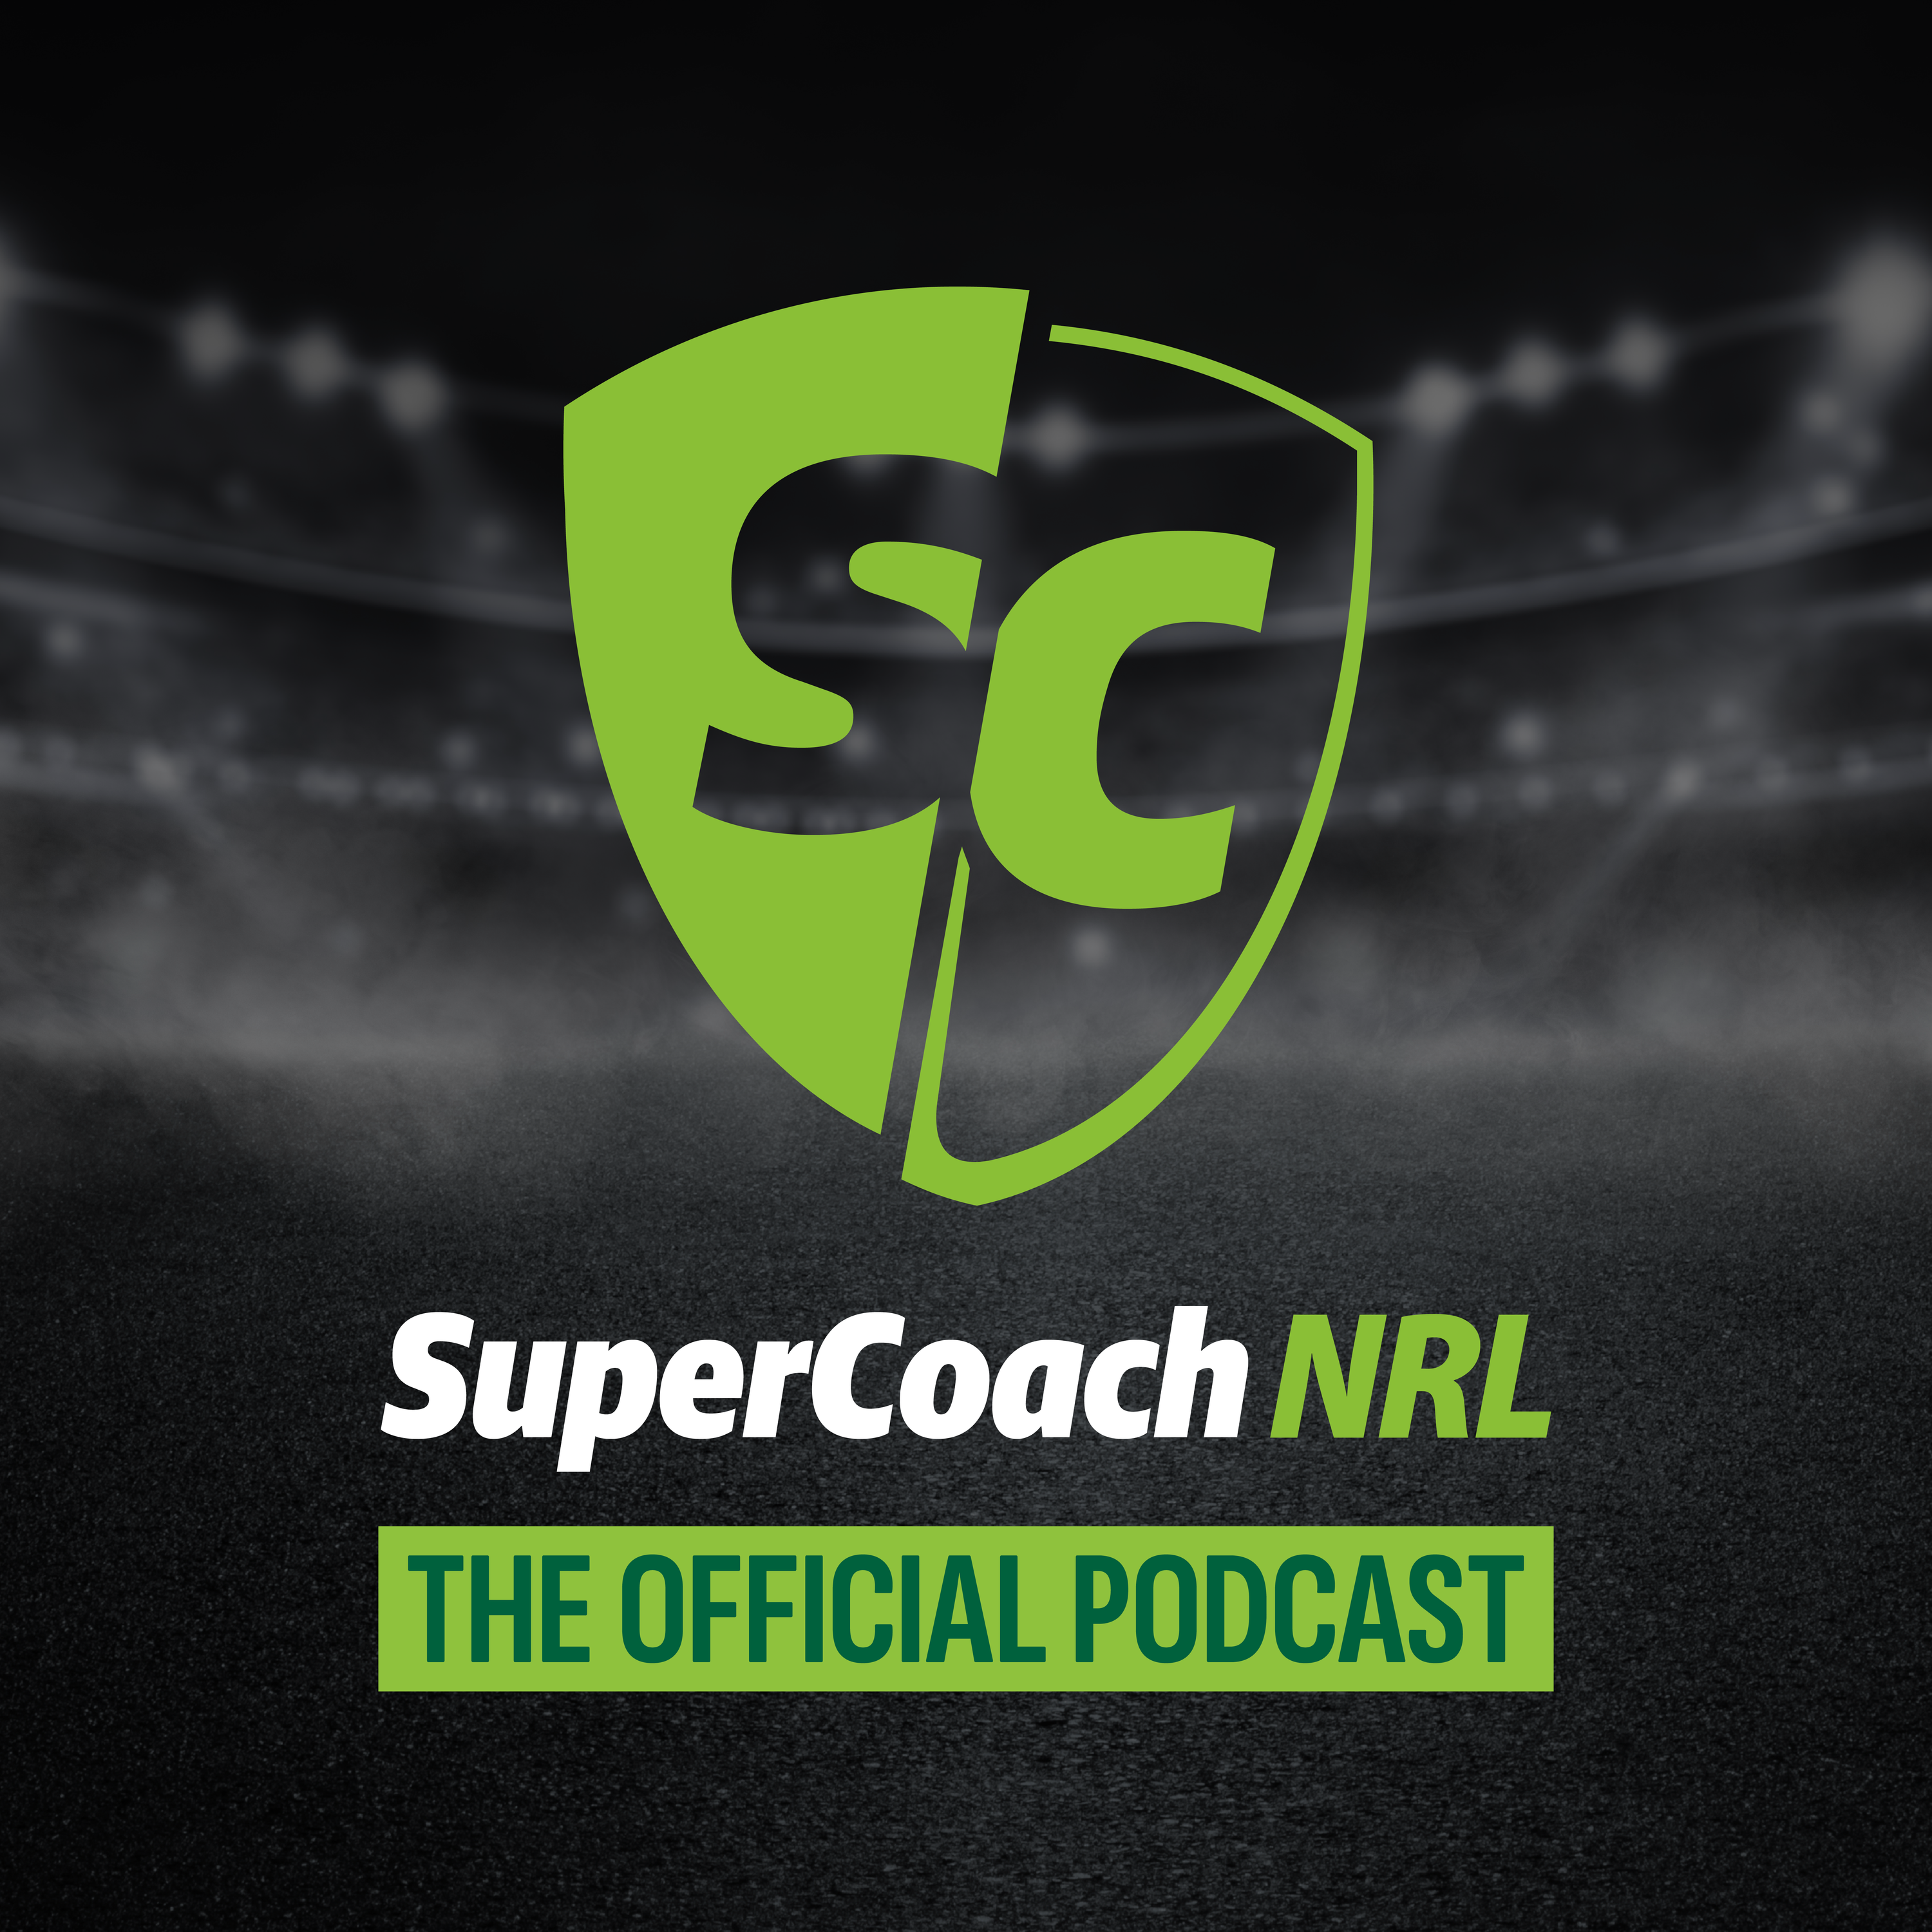 KFC SuperCoach podcast: We're back for 2022!